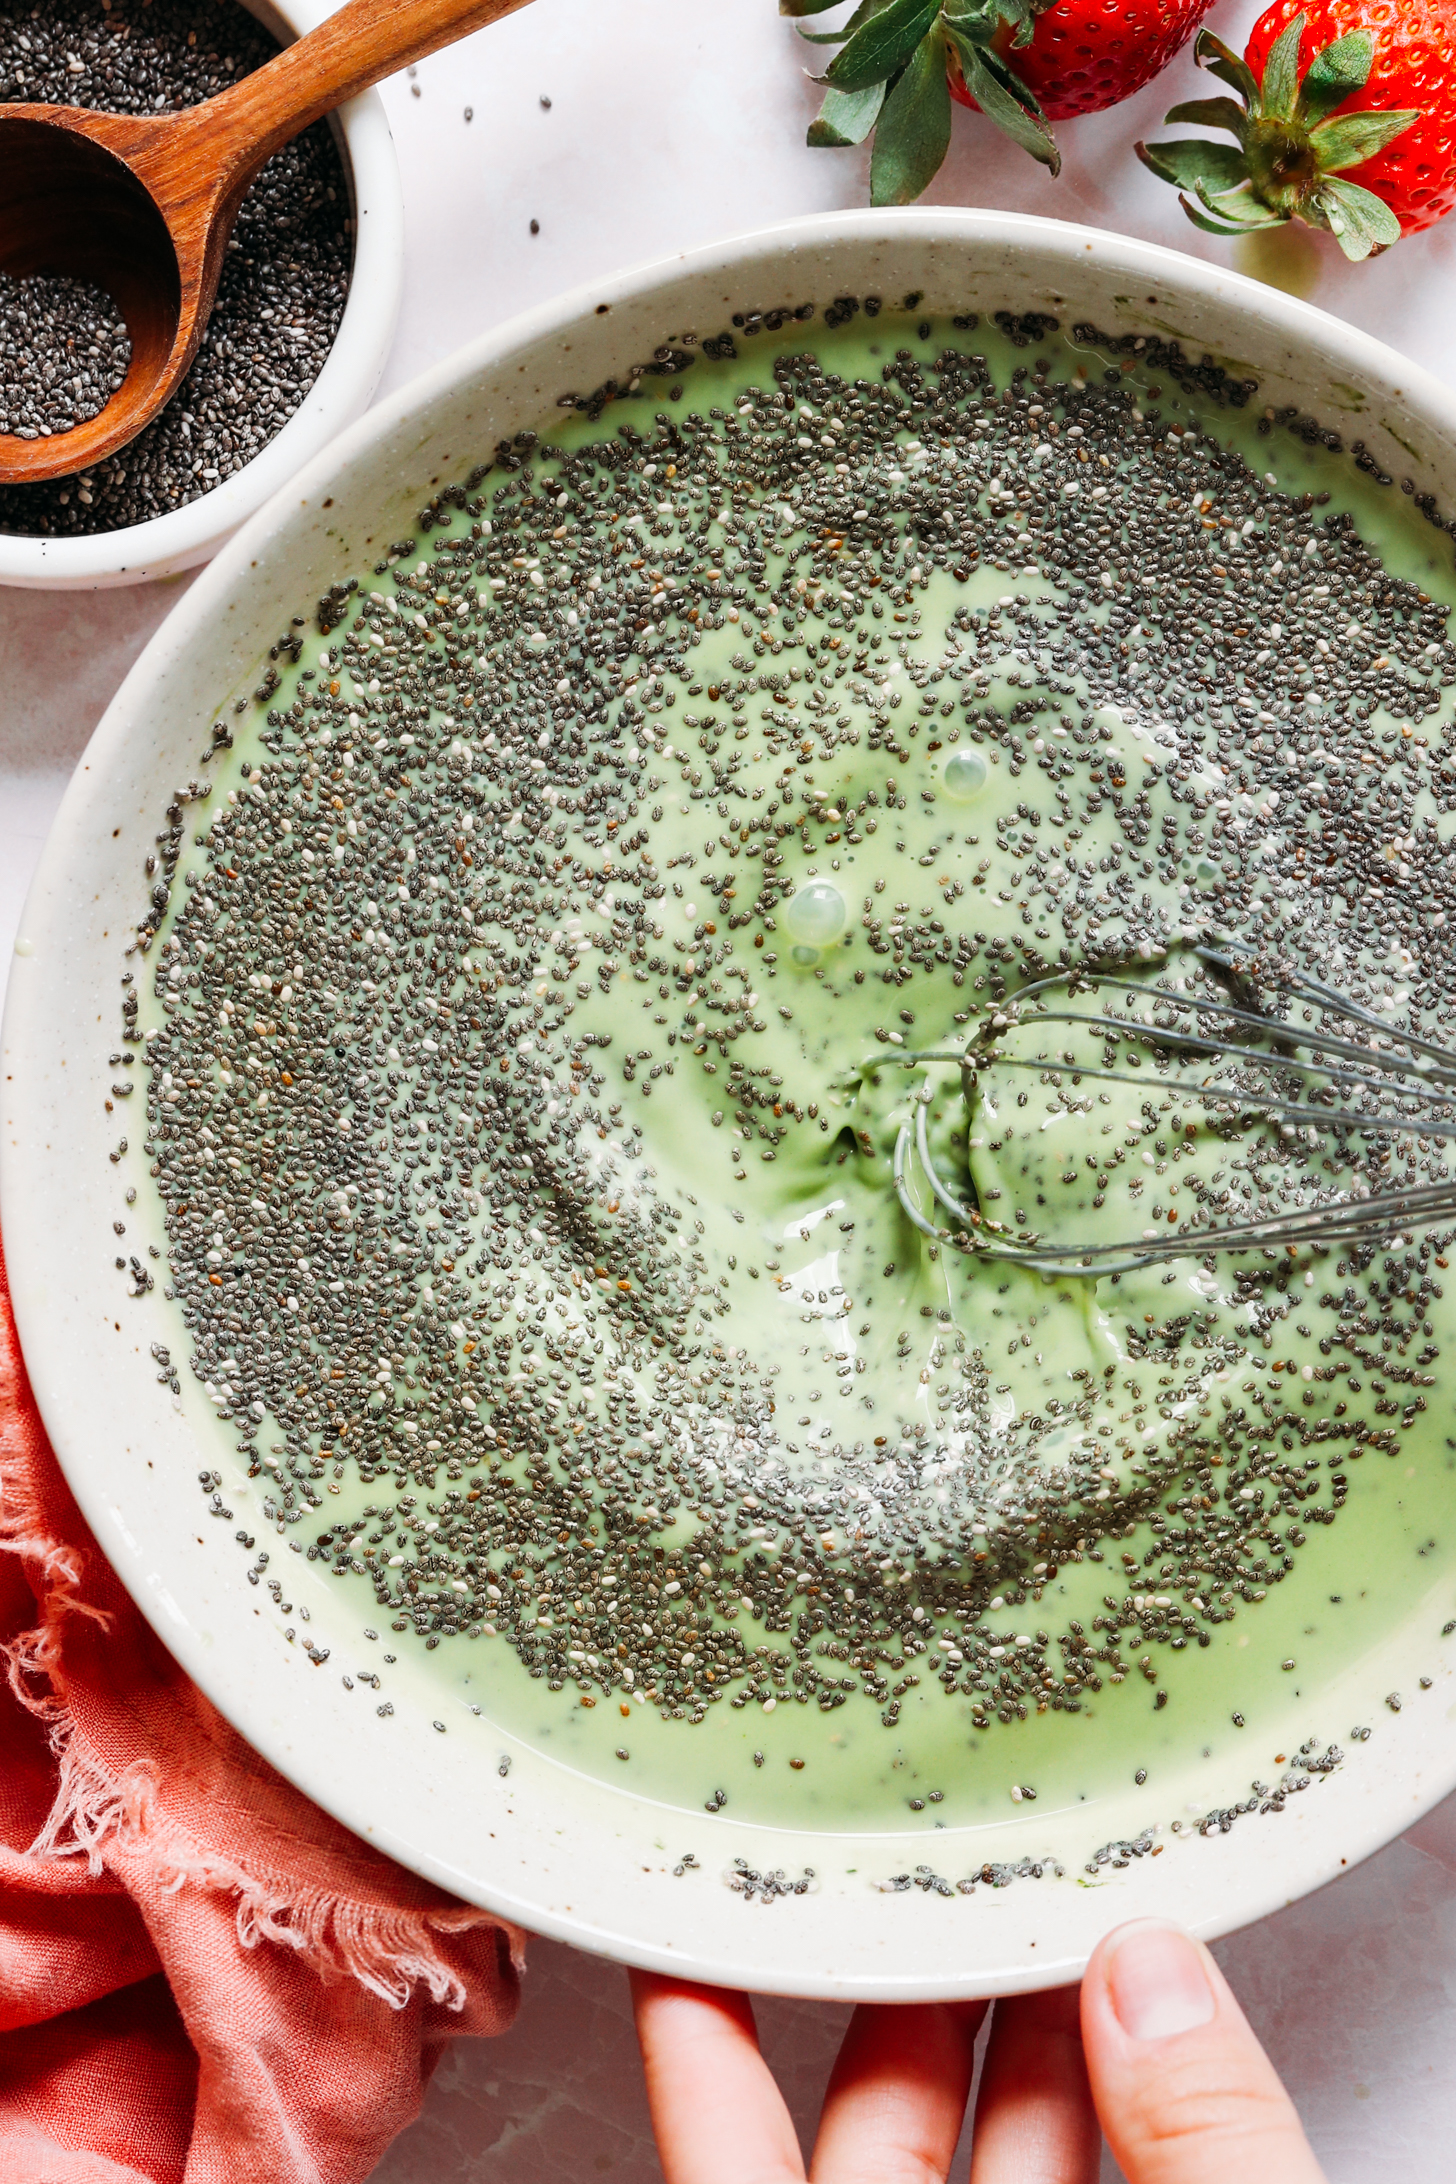 Whisking chia seeds into a vibrant green matcha mixture